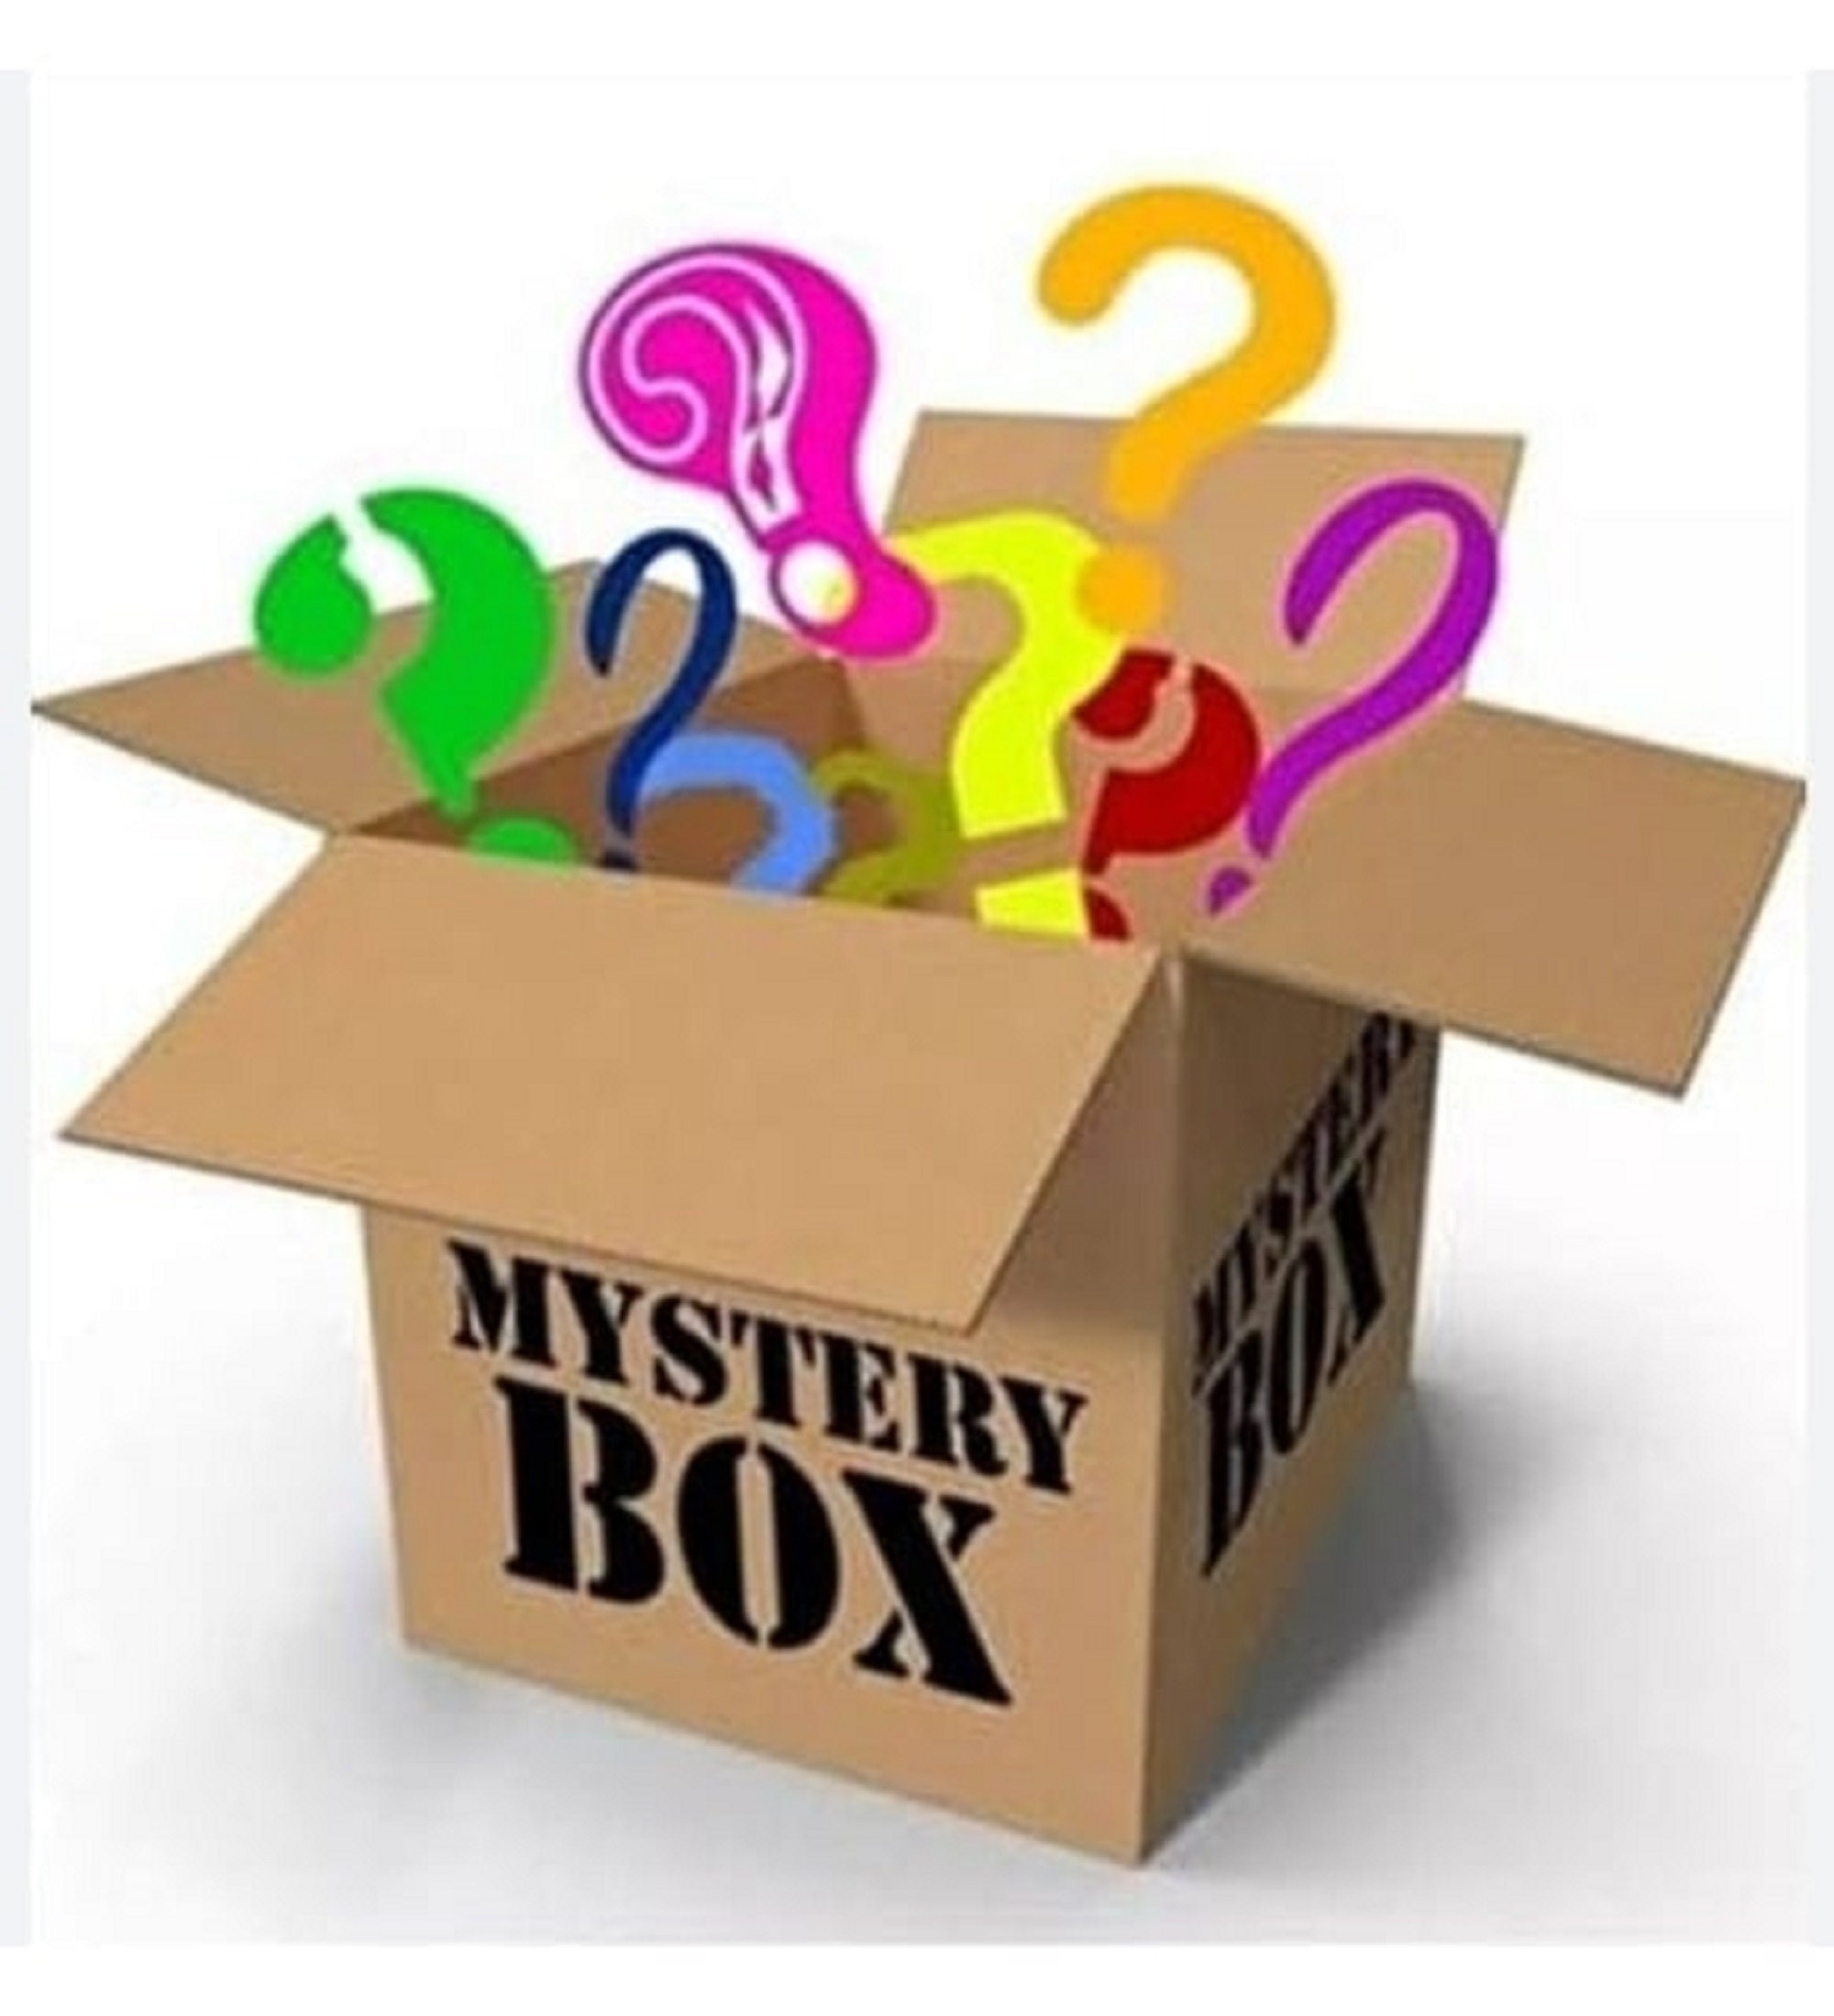 Mystery Box, Surprise Box Full of Handcrafted Design Products, Medium Size  Surprise Gift Box -  Canada